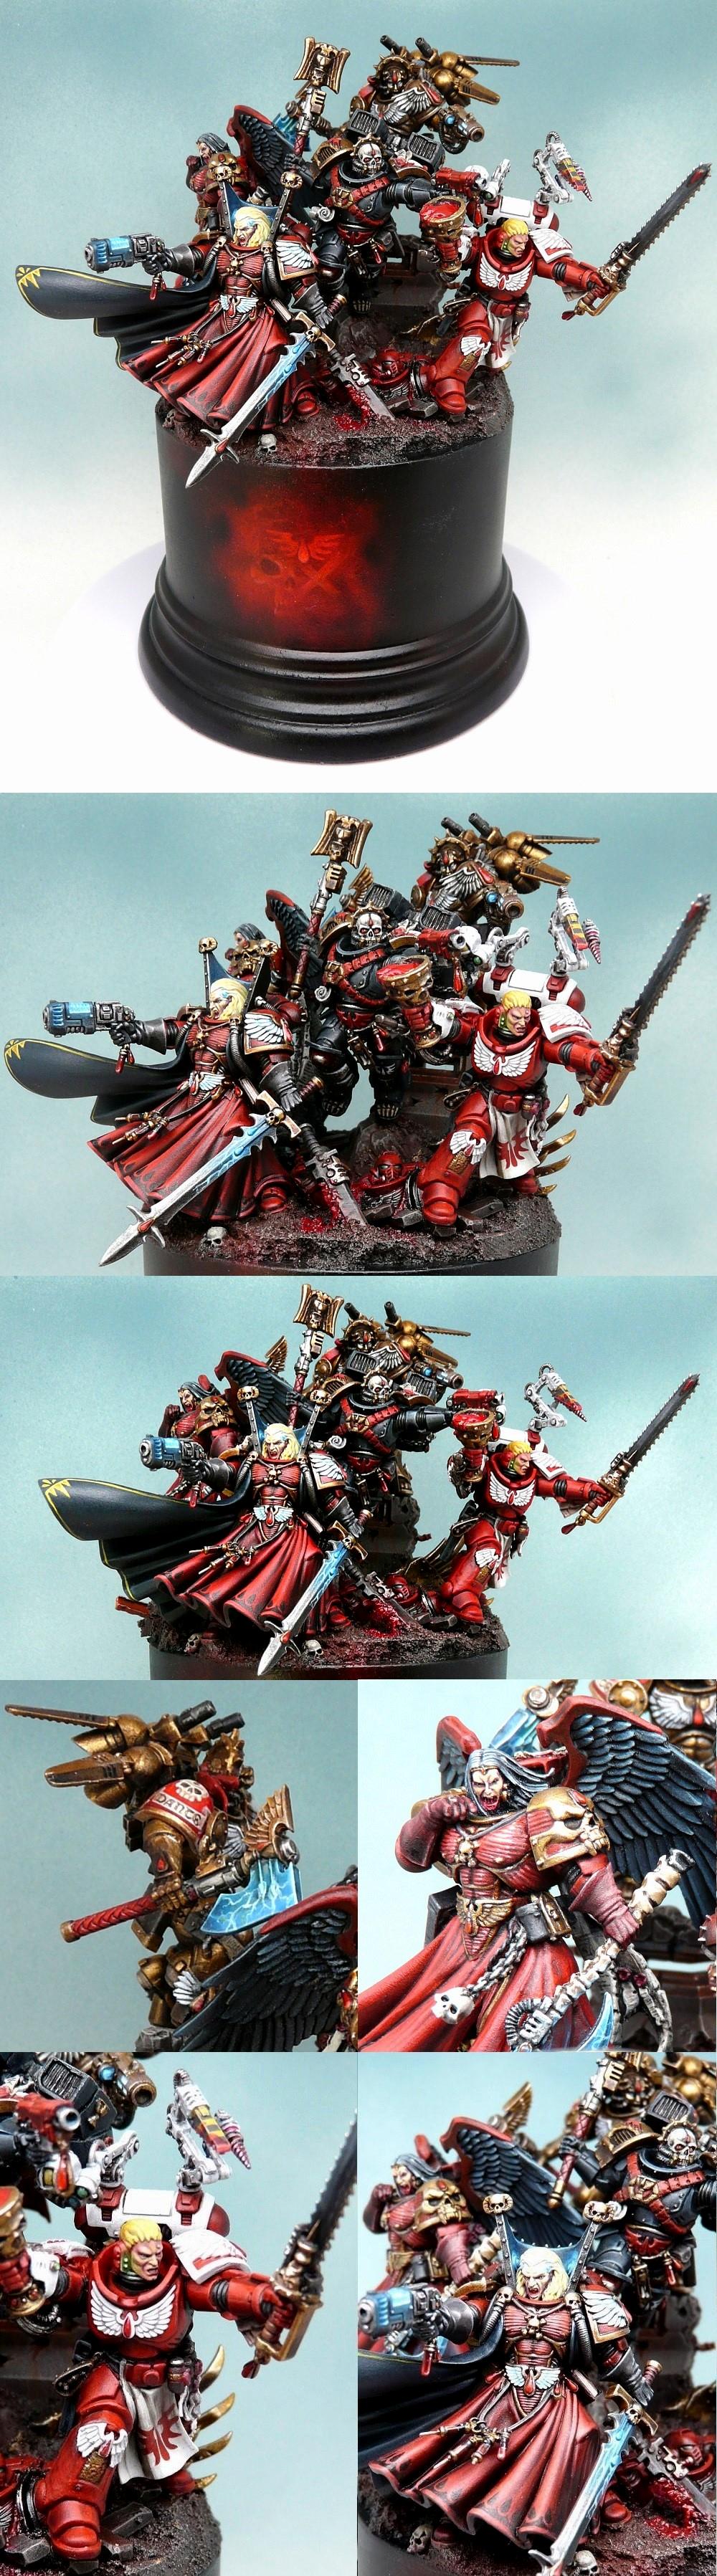 Astorath, Astorath The Grim, Blood Angels, Chapter Master, Corbulo, Dante, Guardian Of The Lost, Lemartes, Librarian, Lord Of Death, Mephiston, Primaris, Sanguinary Priest, Space Marines